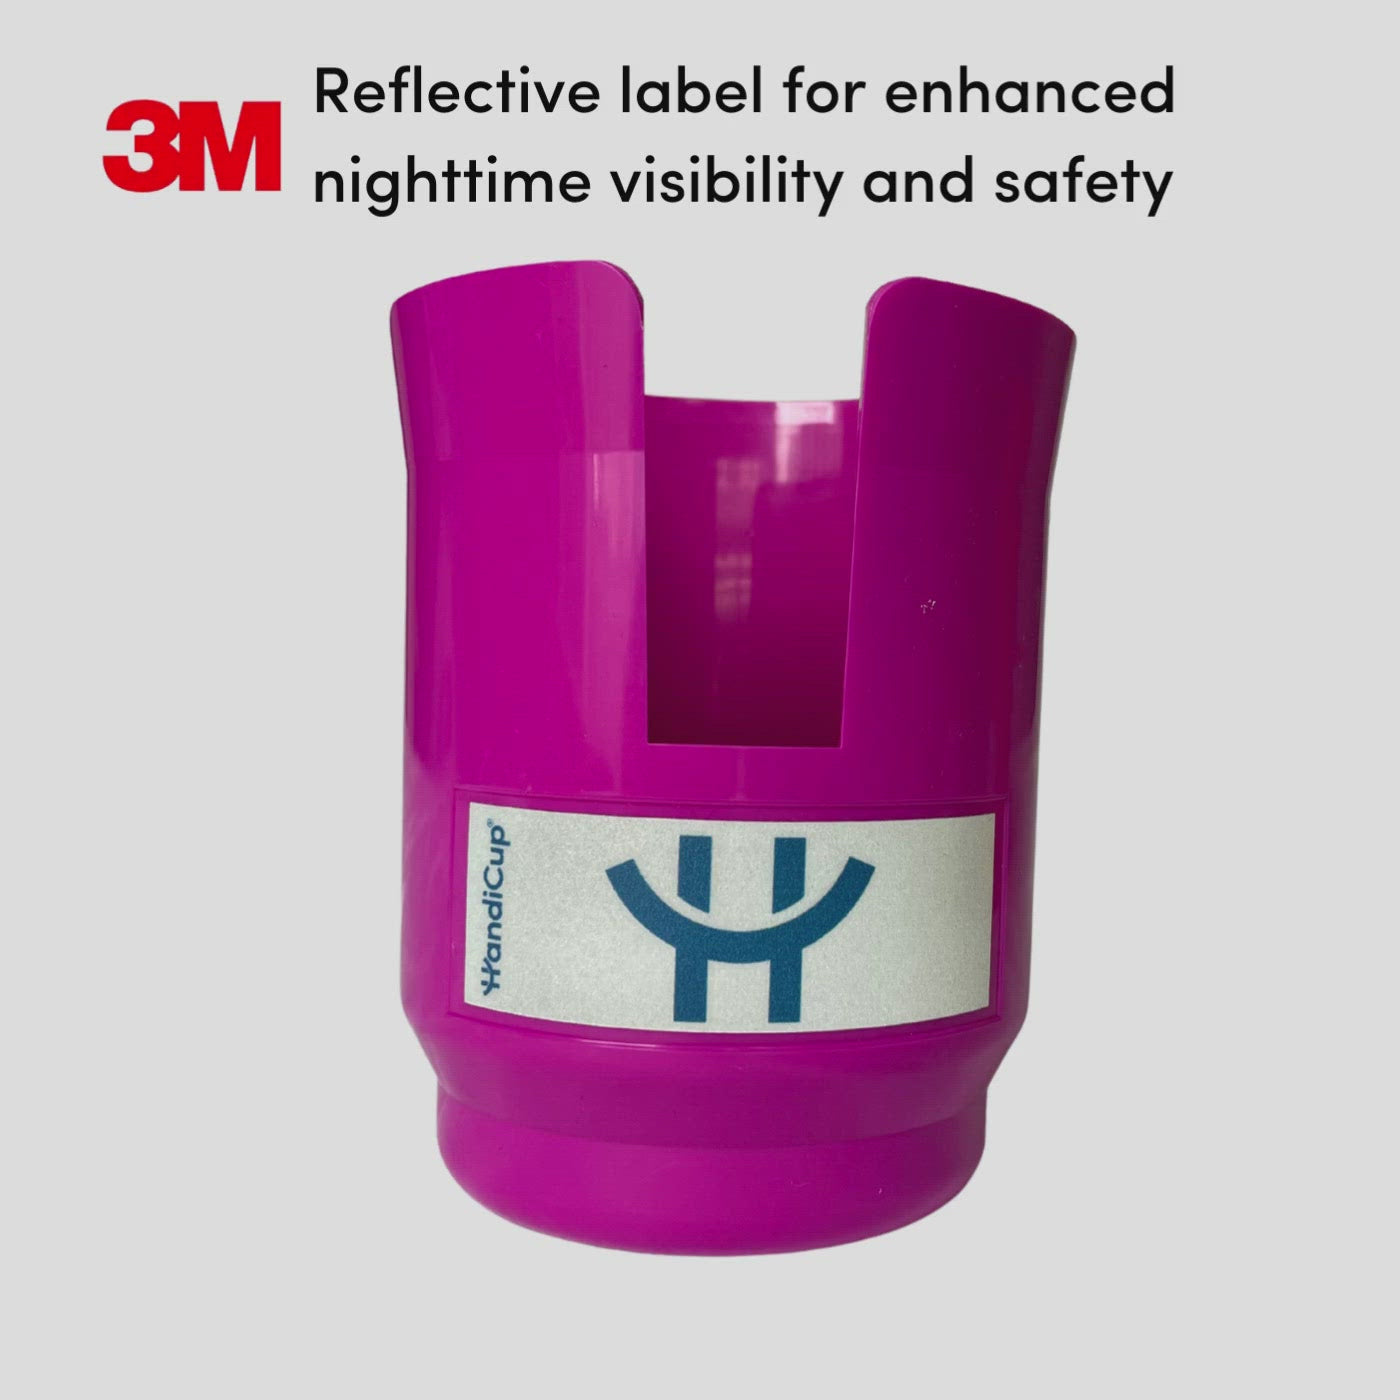 3m HandiCup label adds enhanced nighttime visibility and safety.